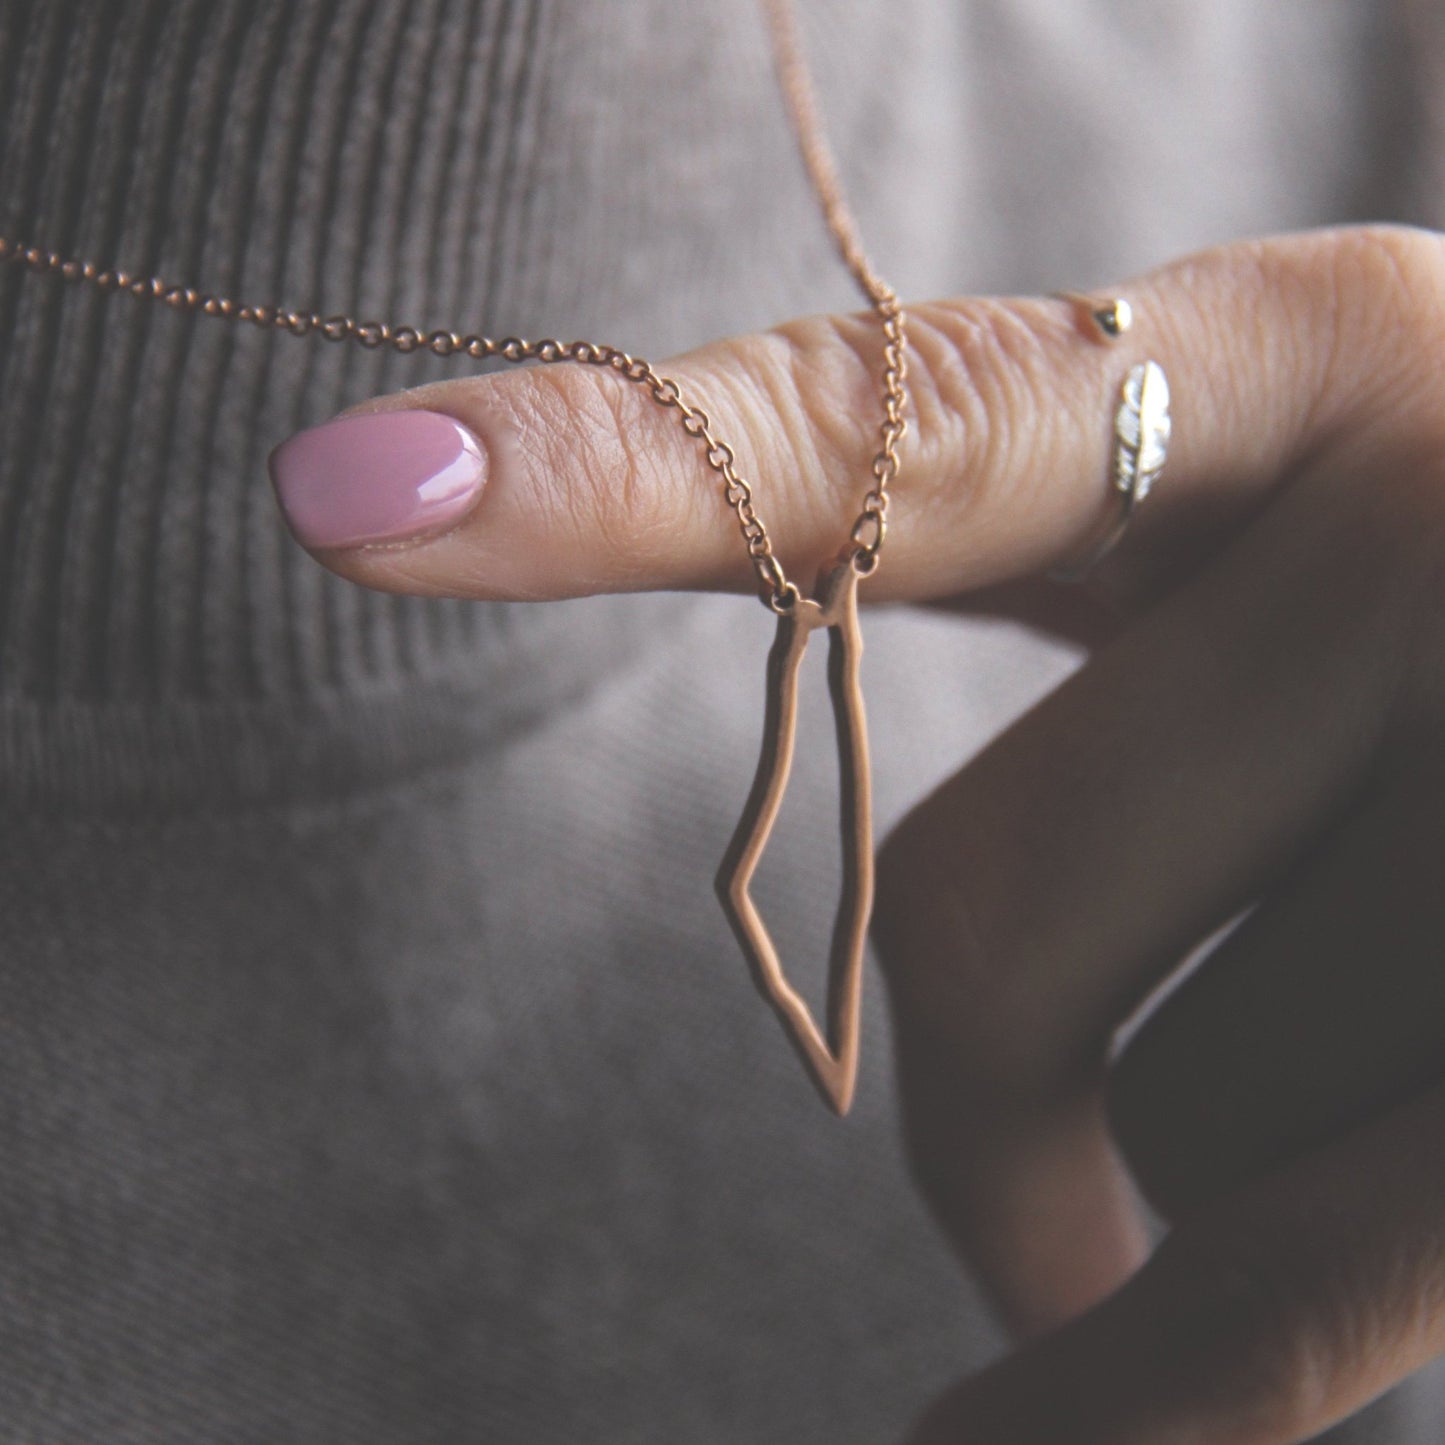 Pali Necklace 2.0 Wear The Peace Necklaces Rose Gold